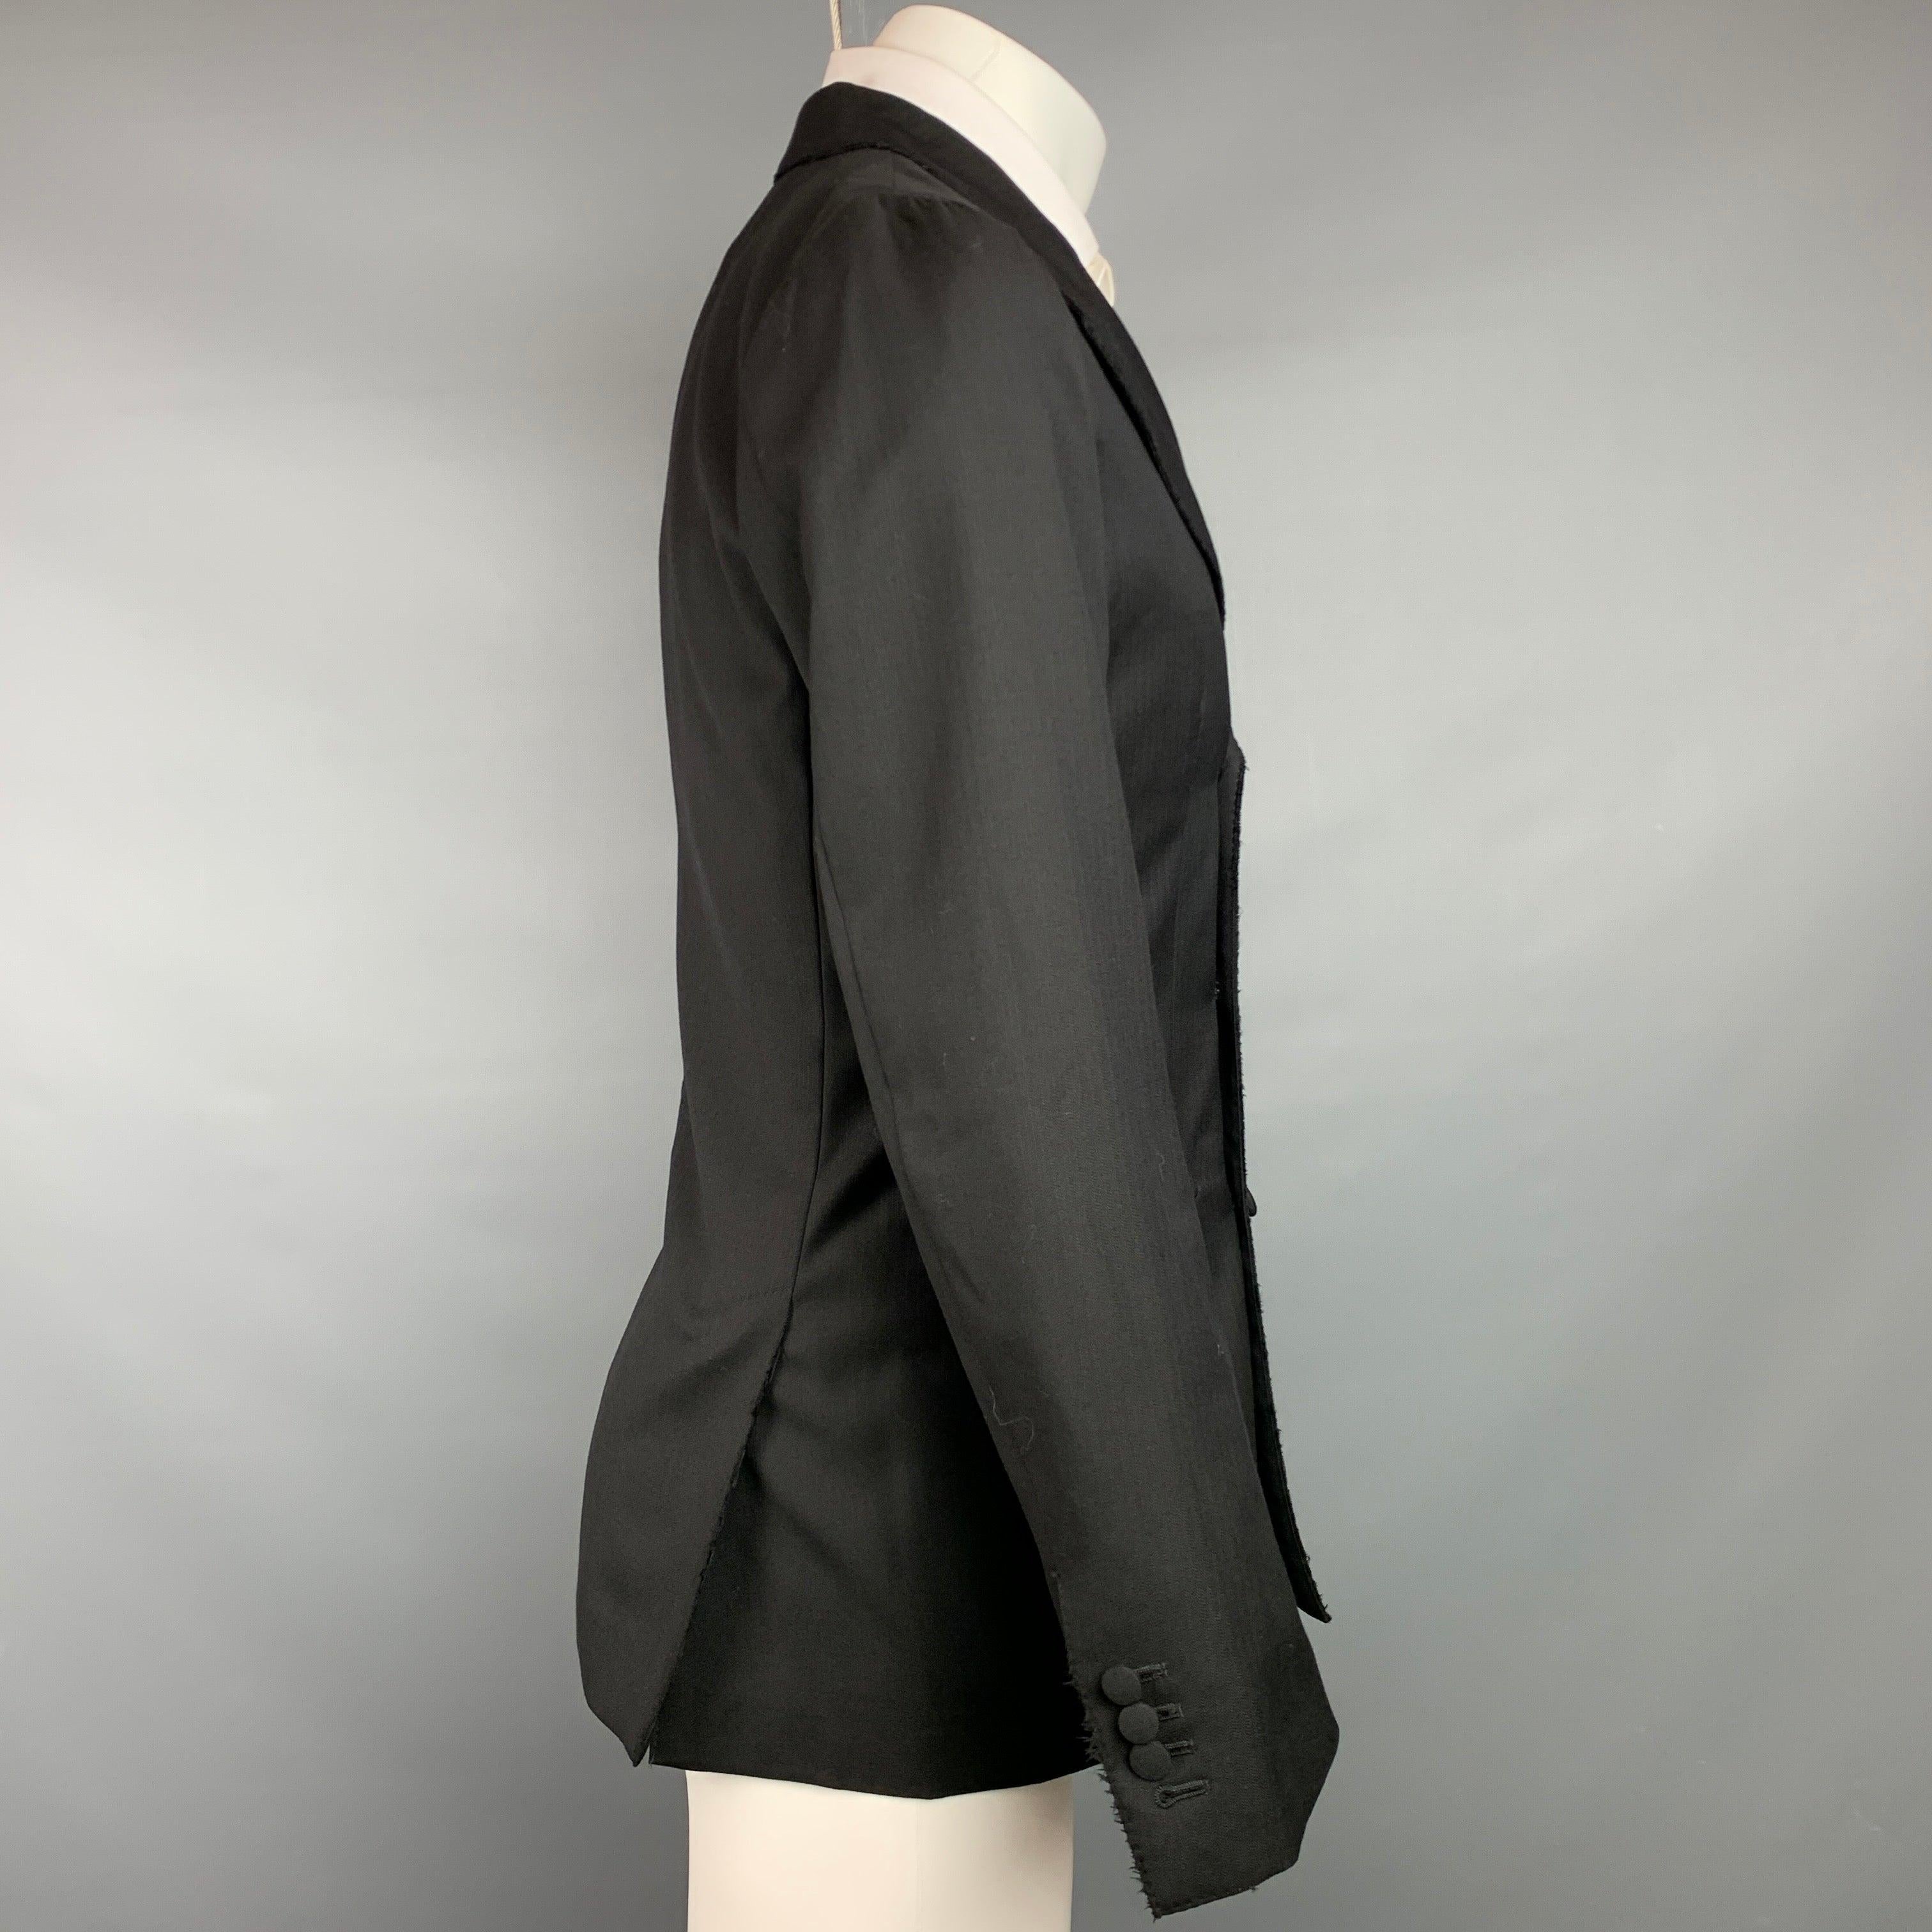 DOLCE & GABBANA Size 38 Black Wool Peak Lapel Double Breasted Sport Coat In Good Condition For Sale In San Francisco, CA